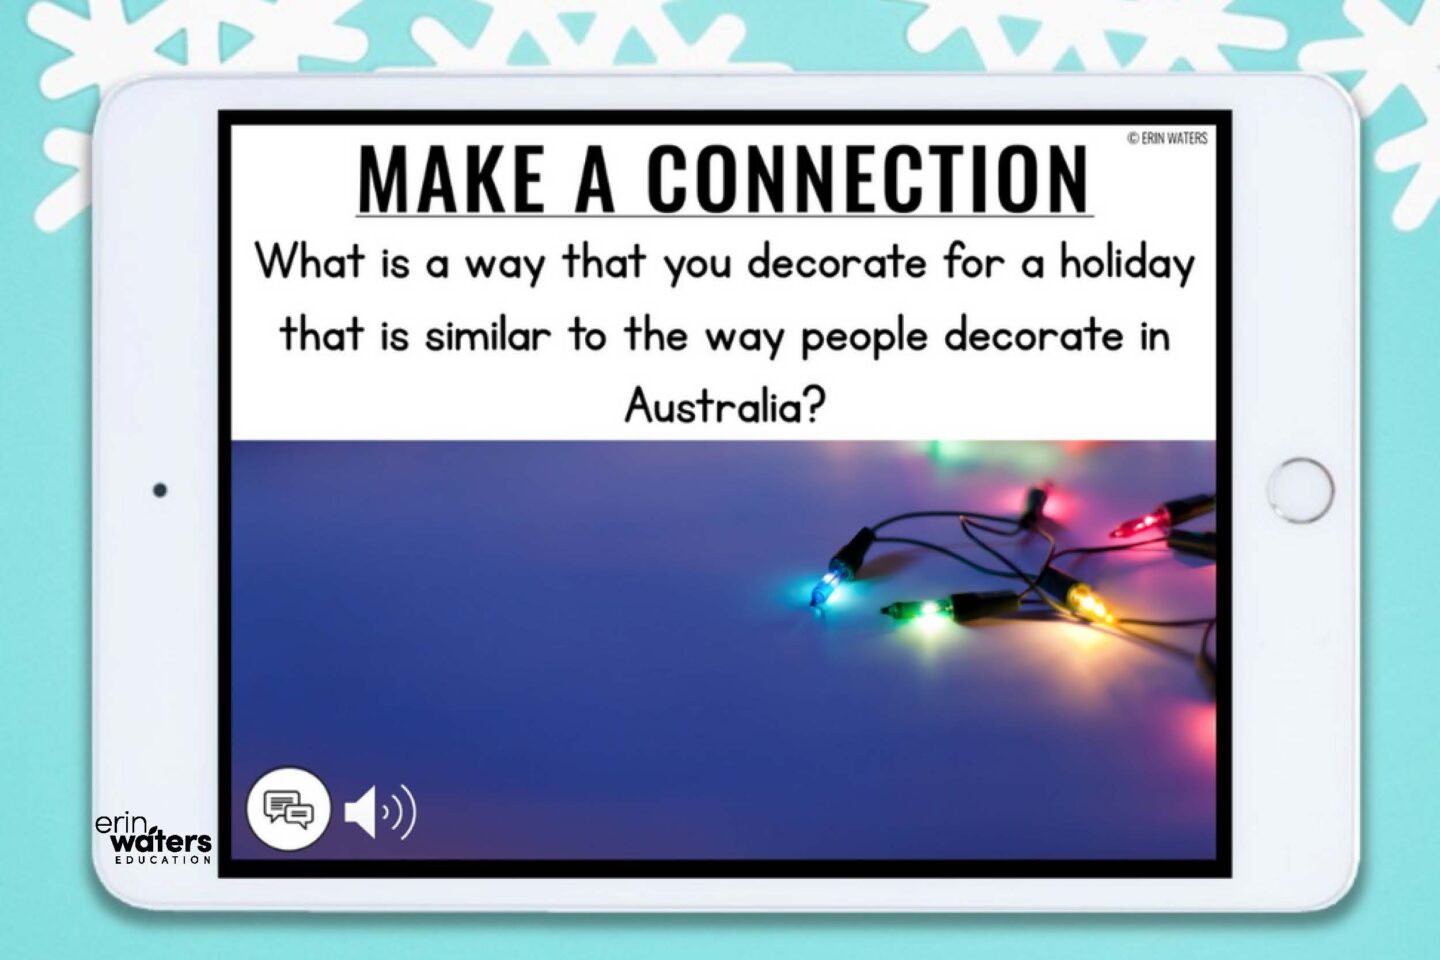 Make a Connection slide with twinkle lights: What is a way that you decorate for a holiday that is similar to the way people decorate in Australia?